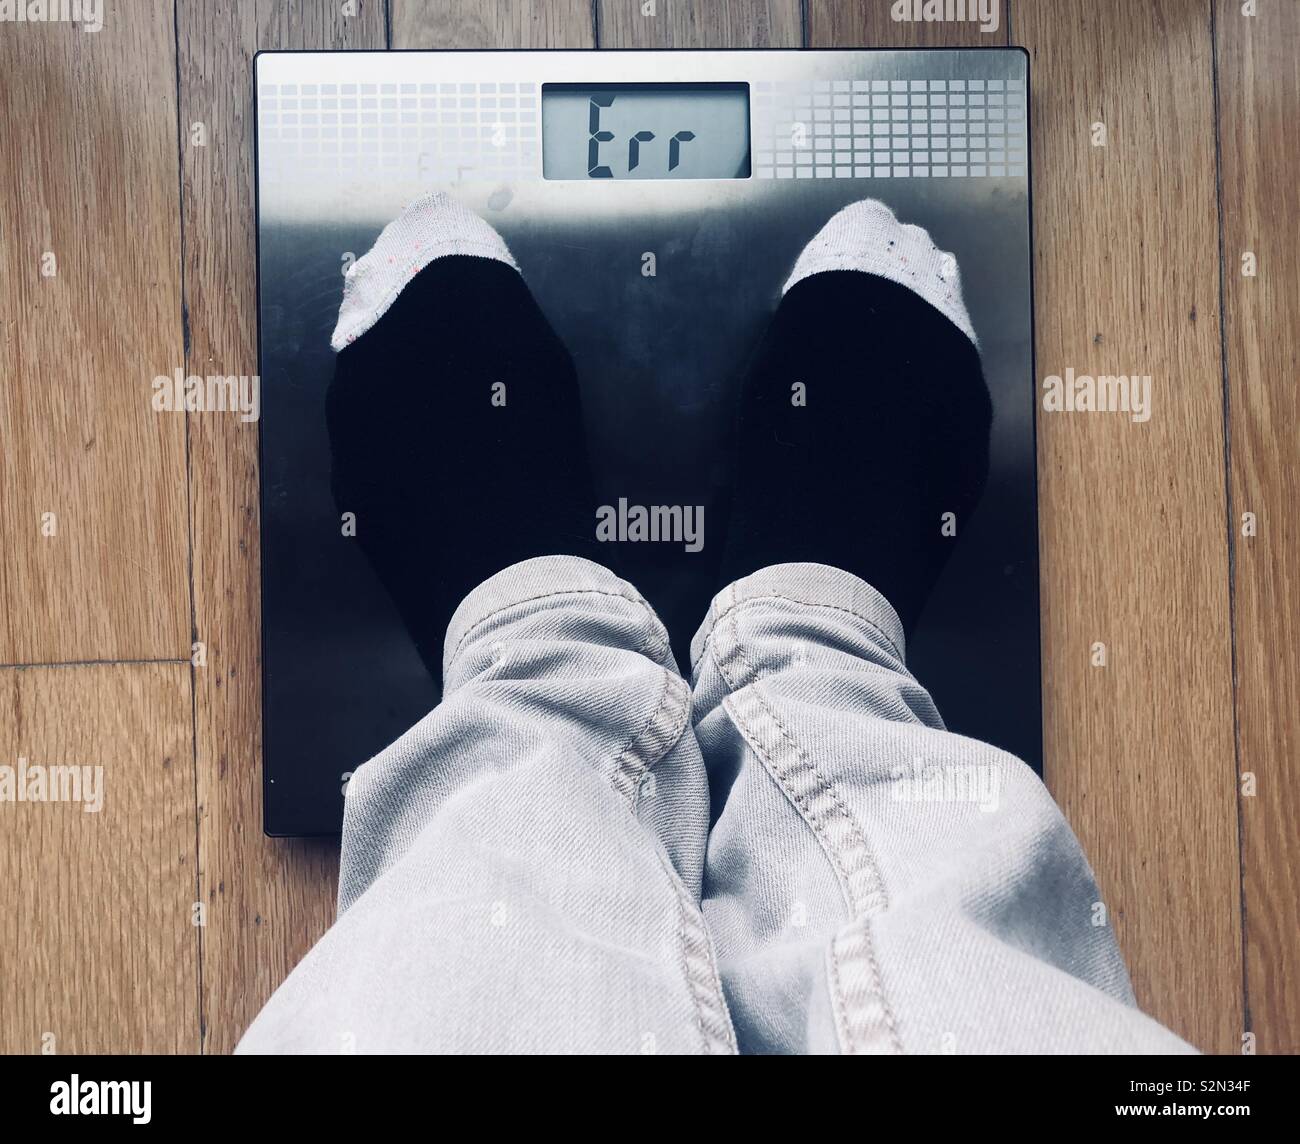 Standing on the bathroom scales and getting an error reading Stock Photo